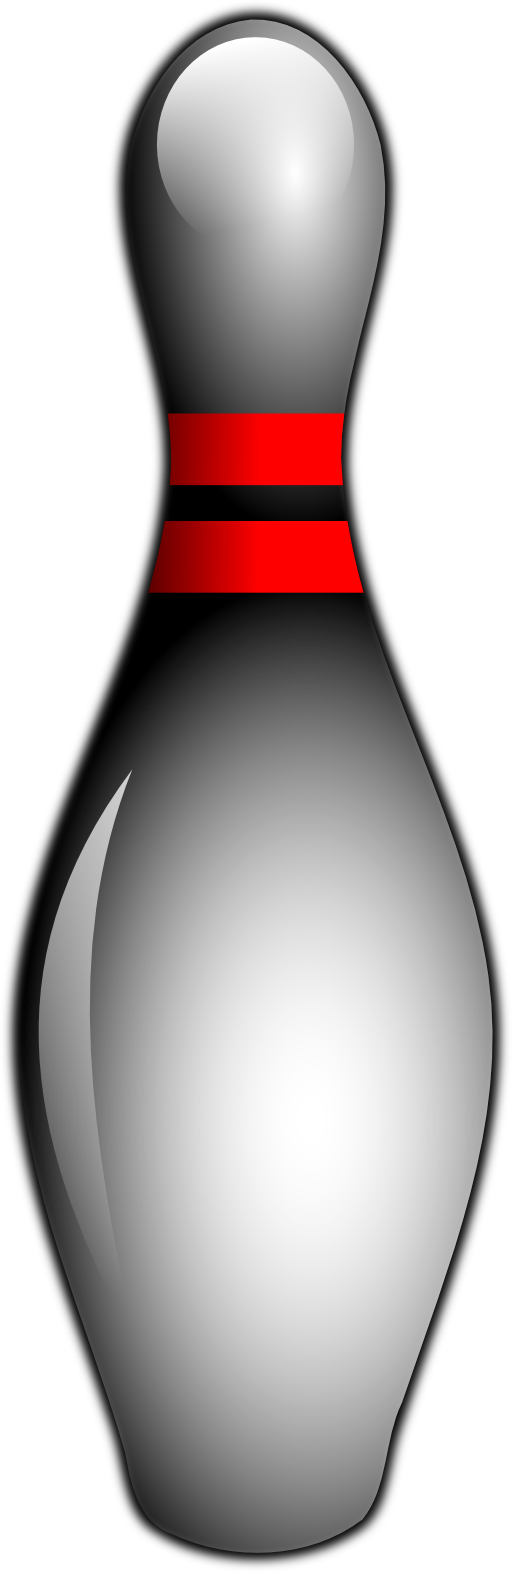 Bowling pin clipart images